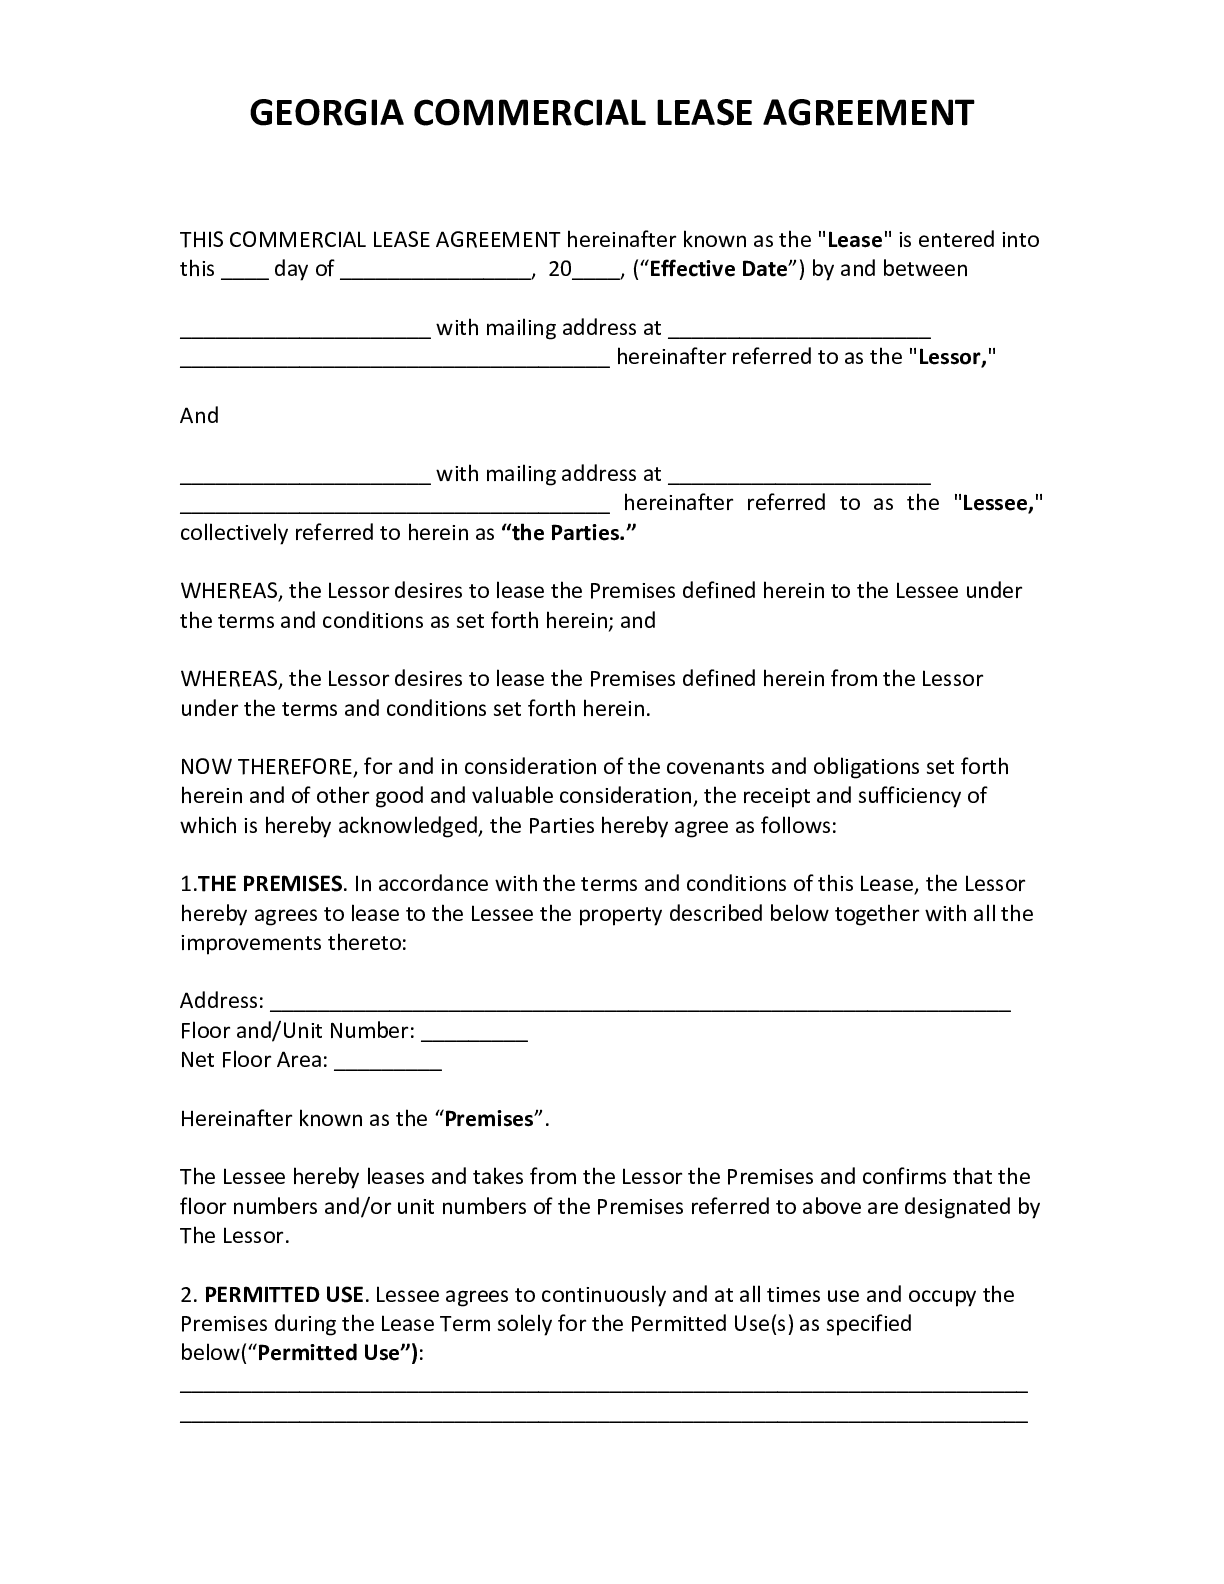 georgia commercial lease agreement template rev 2022